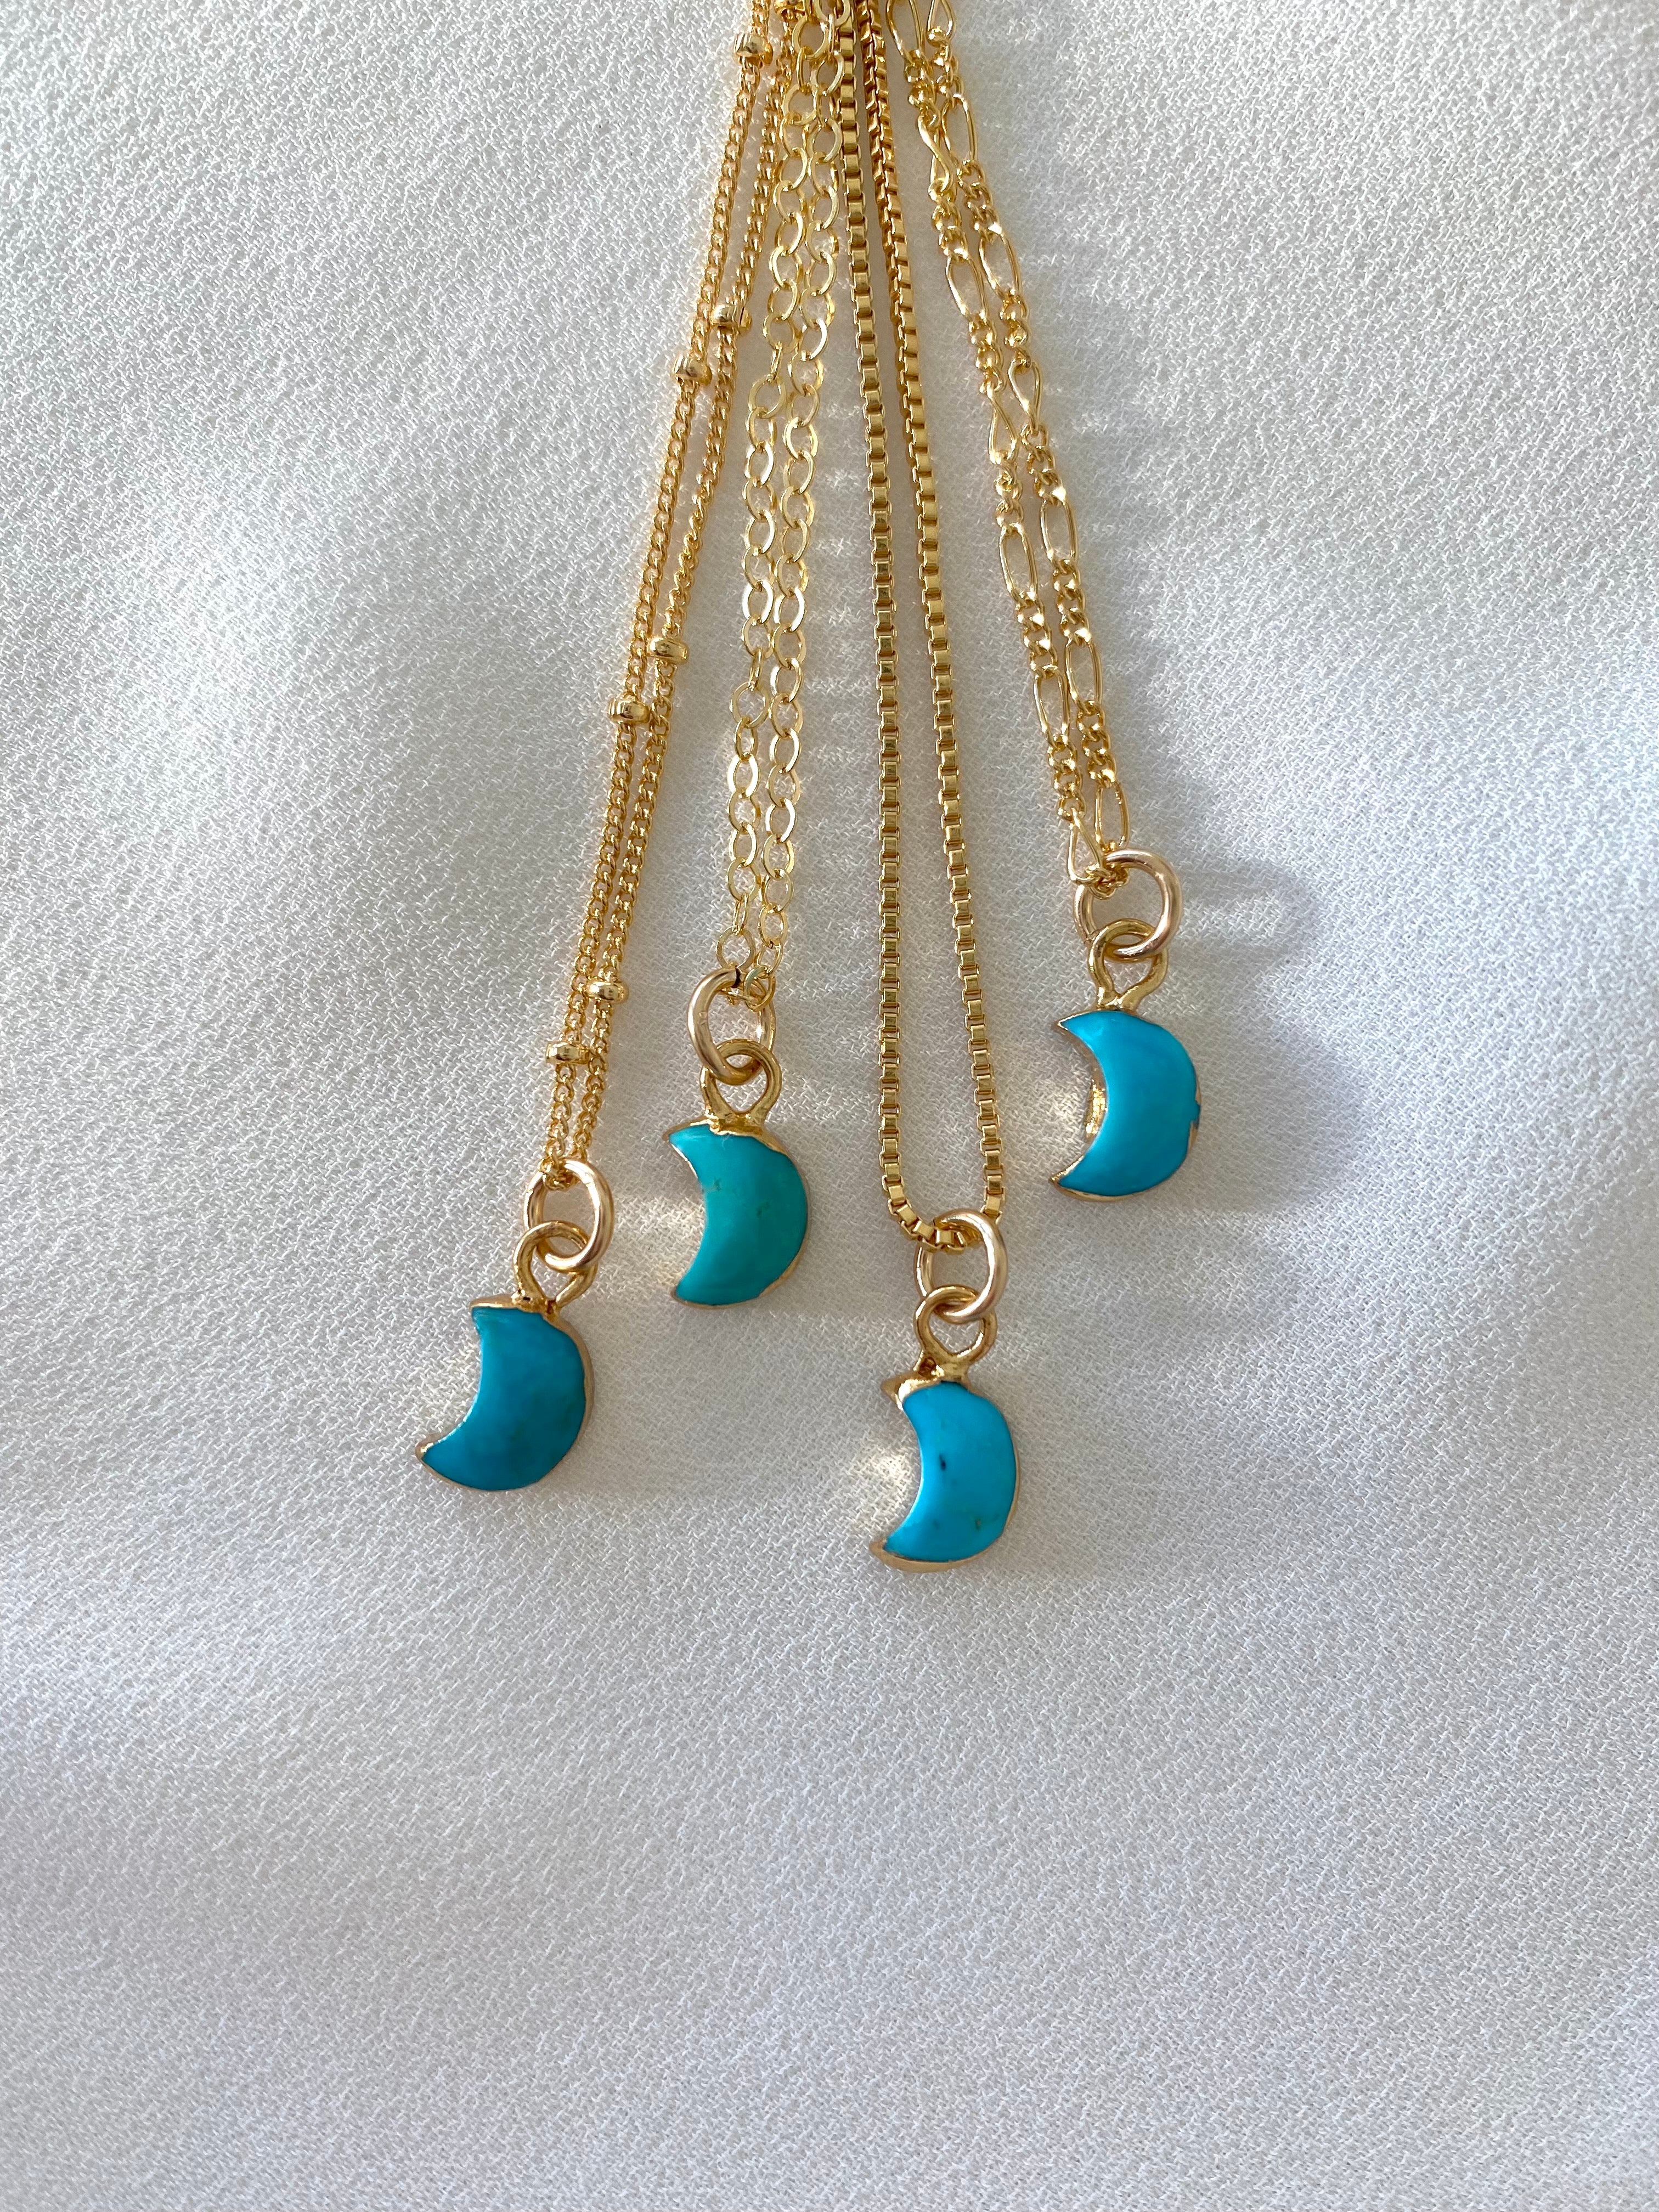 Tiny Raw Turquoise Crescent Moon Pendant Necklace - December Birthstone - Gold Chain